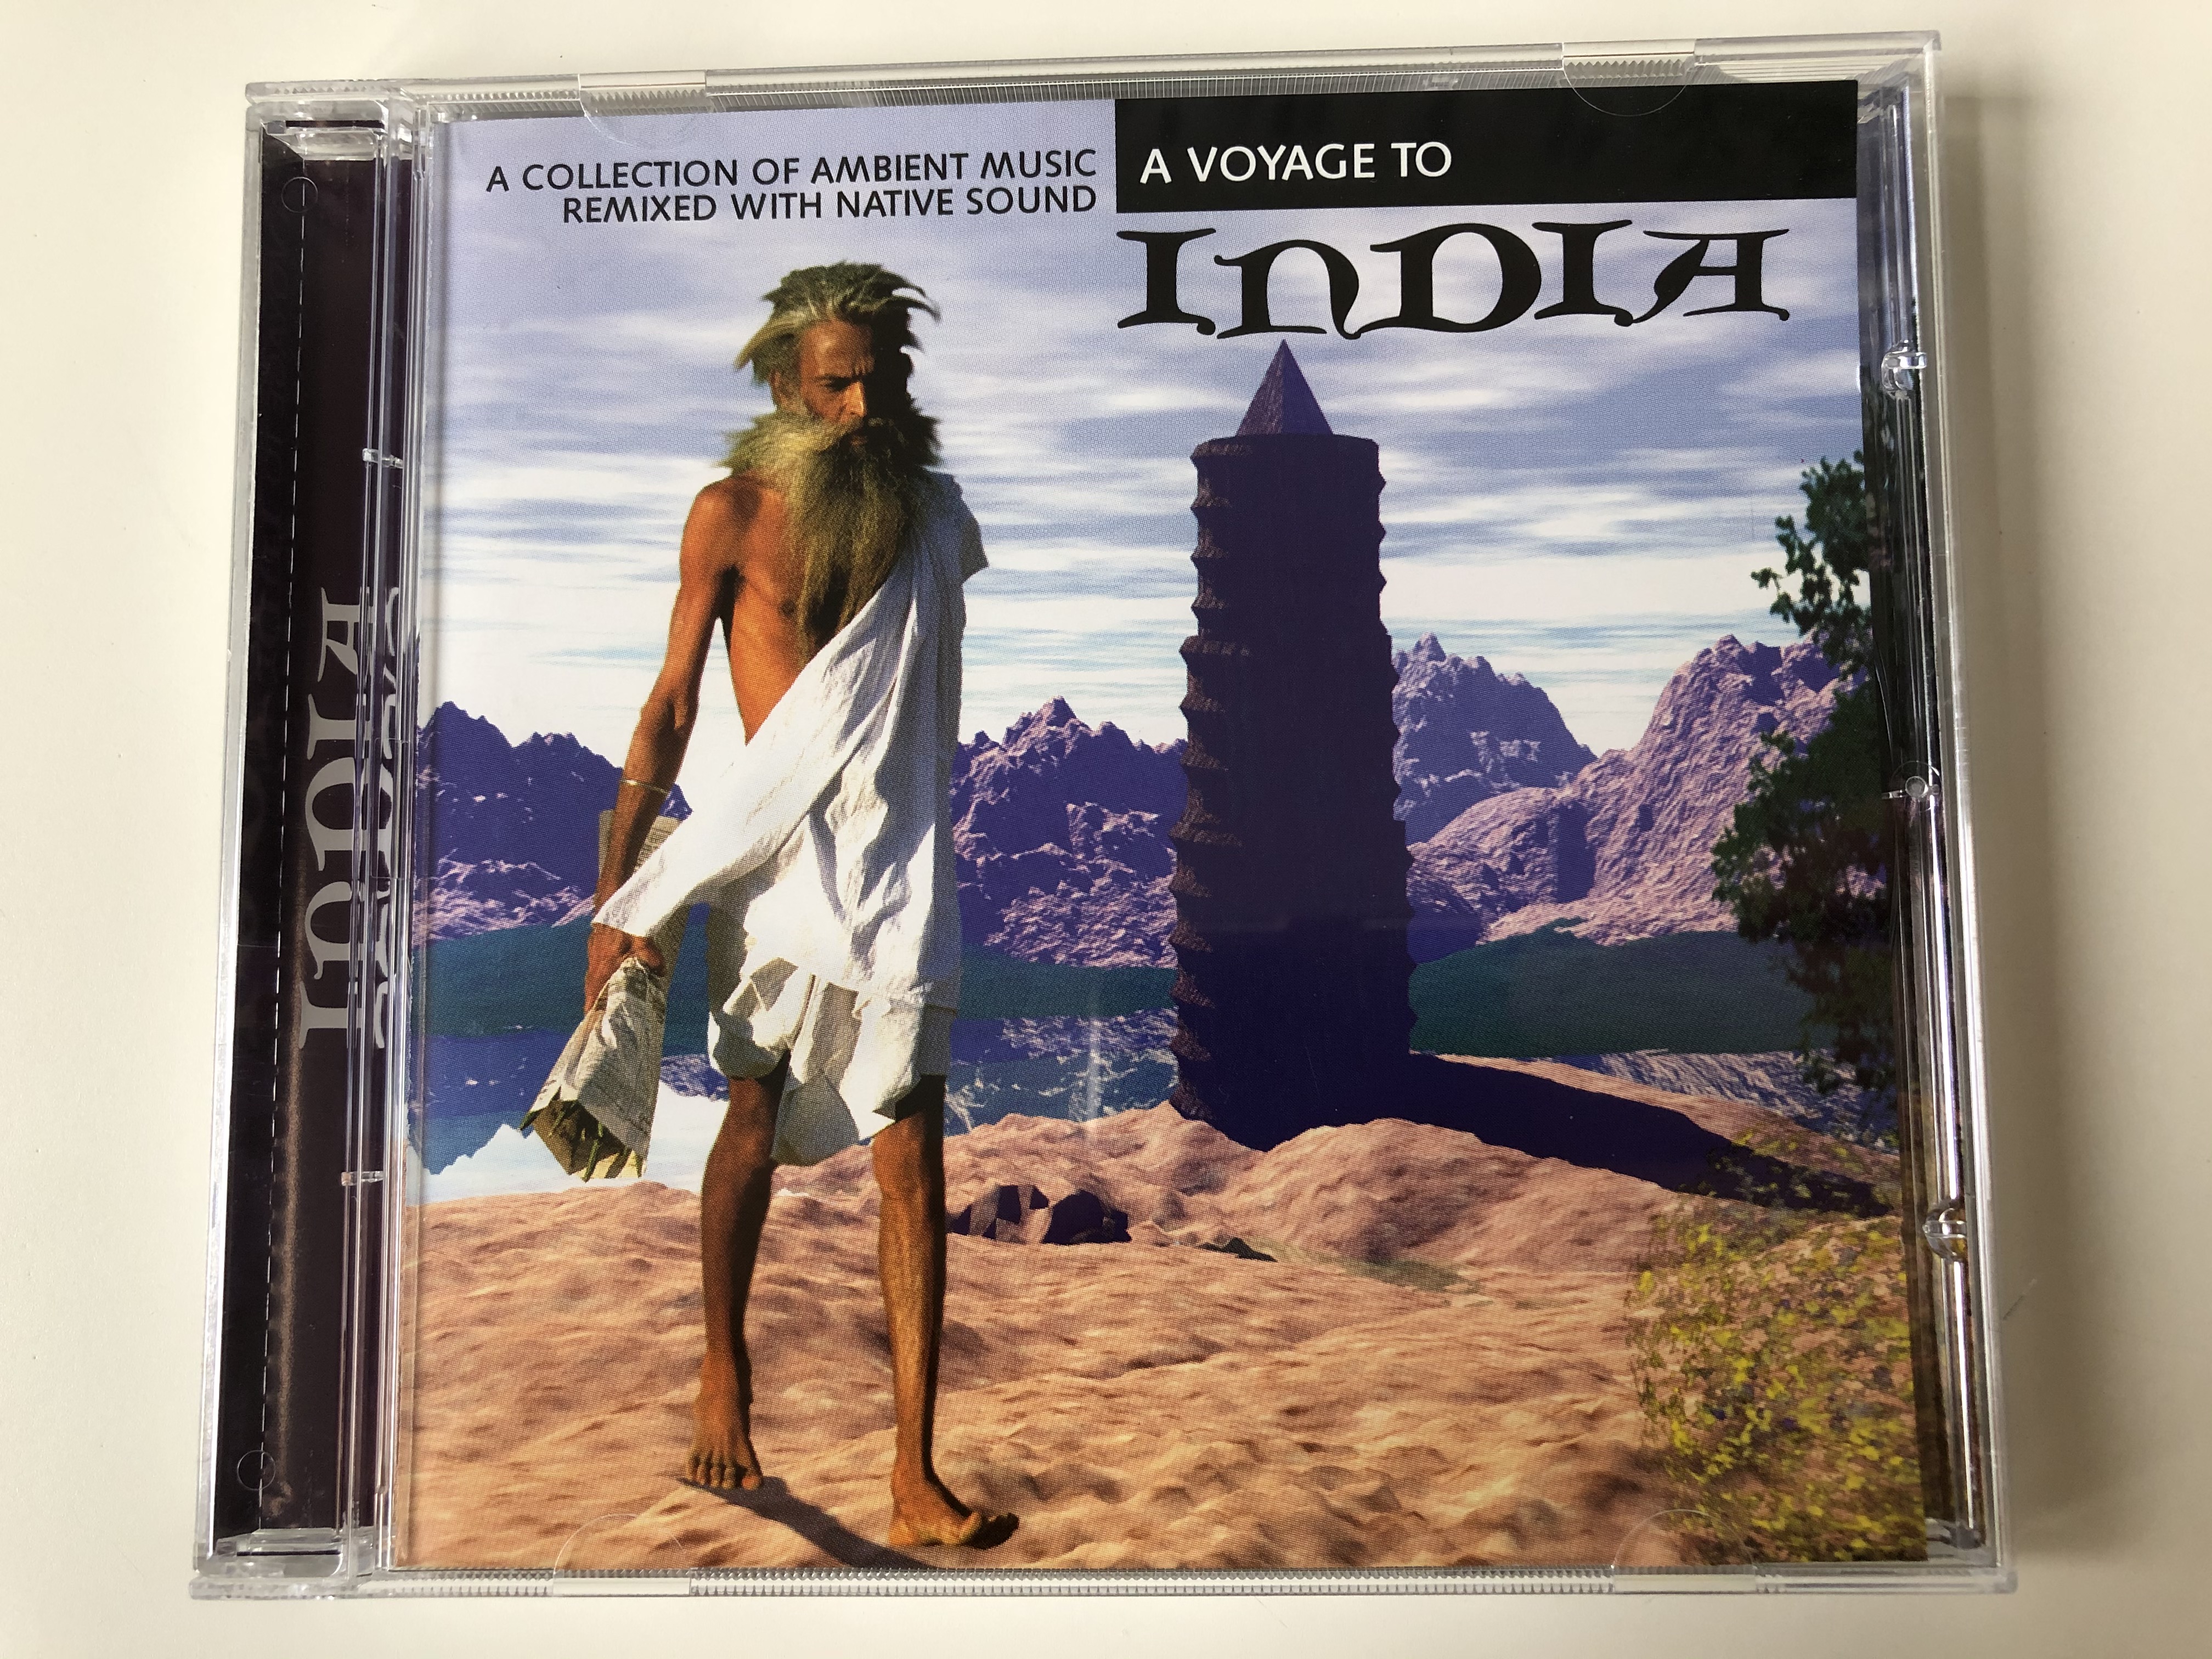 a-voyage-to-india-a-collection-of-ambient-music-remixed-with-native-sound-mastertone-audio-cd-1998-0447-1-.jpg